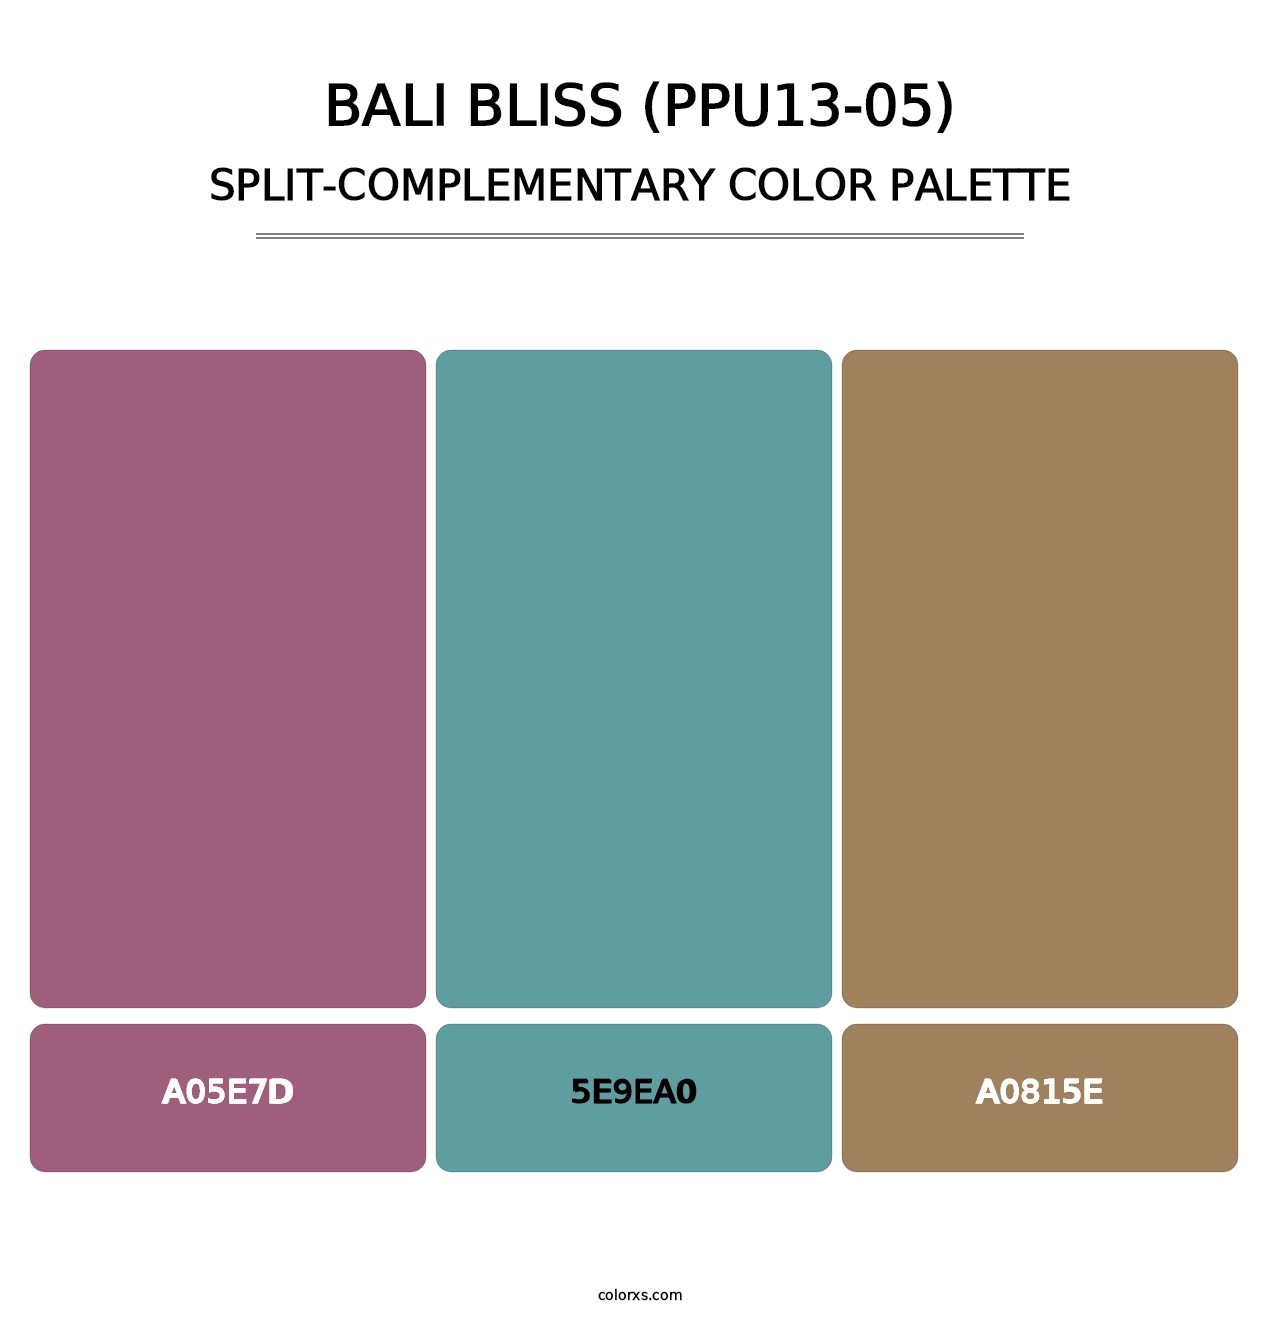 Bali Bliss (PPU13-05) - Split-Complementary Color Palette